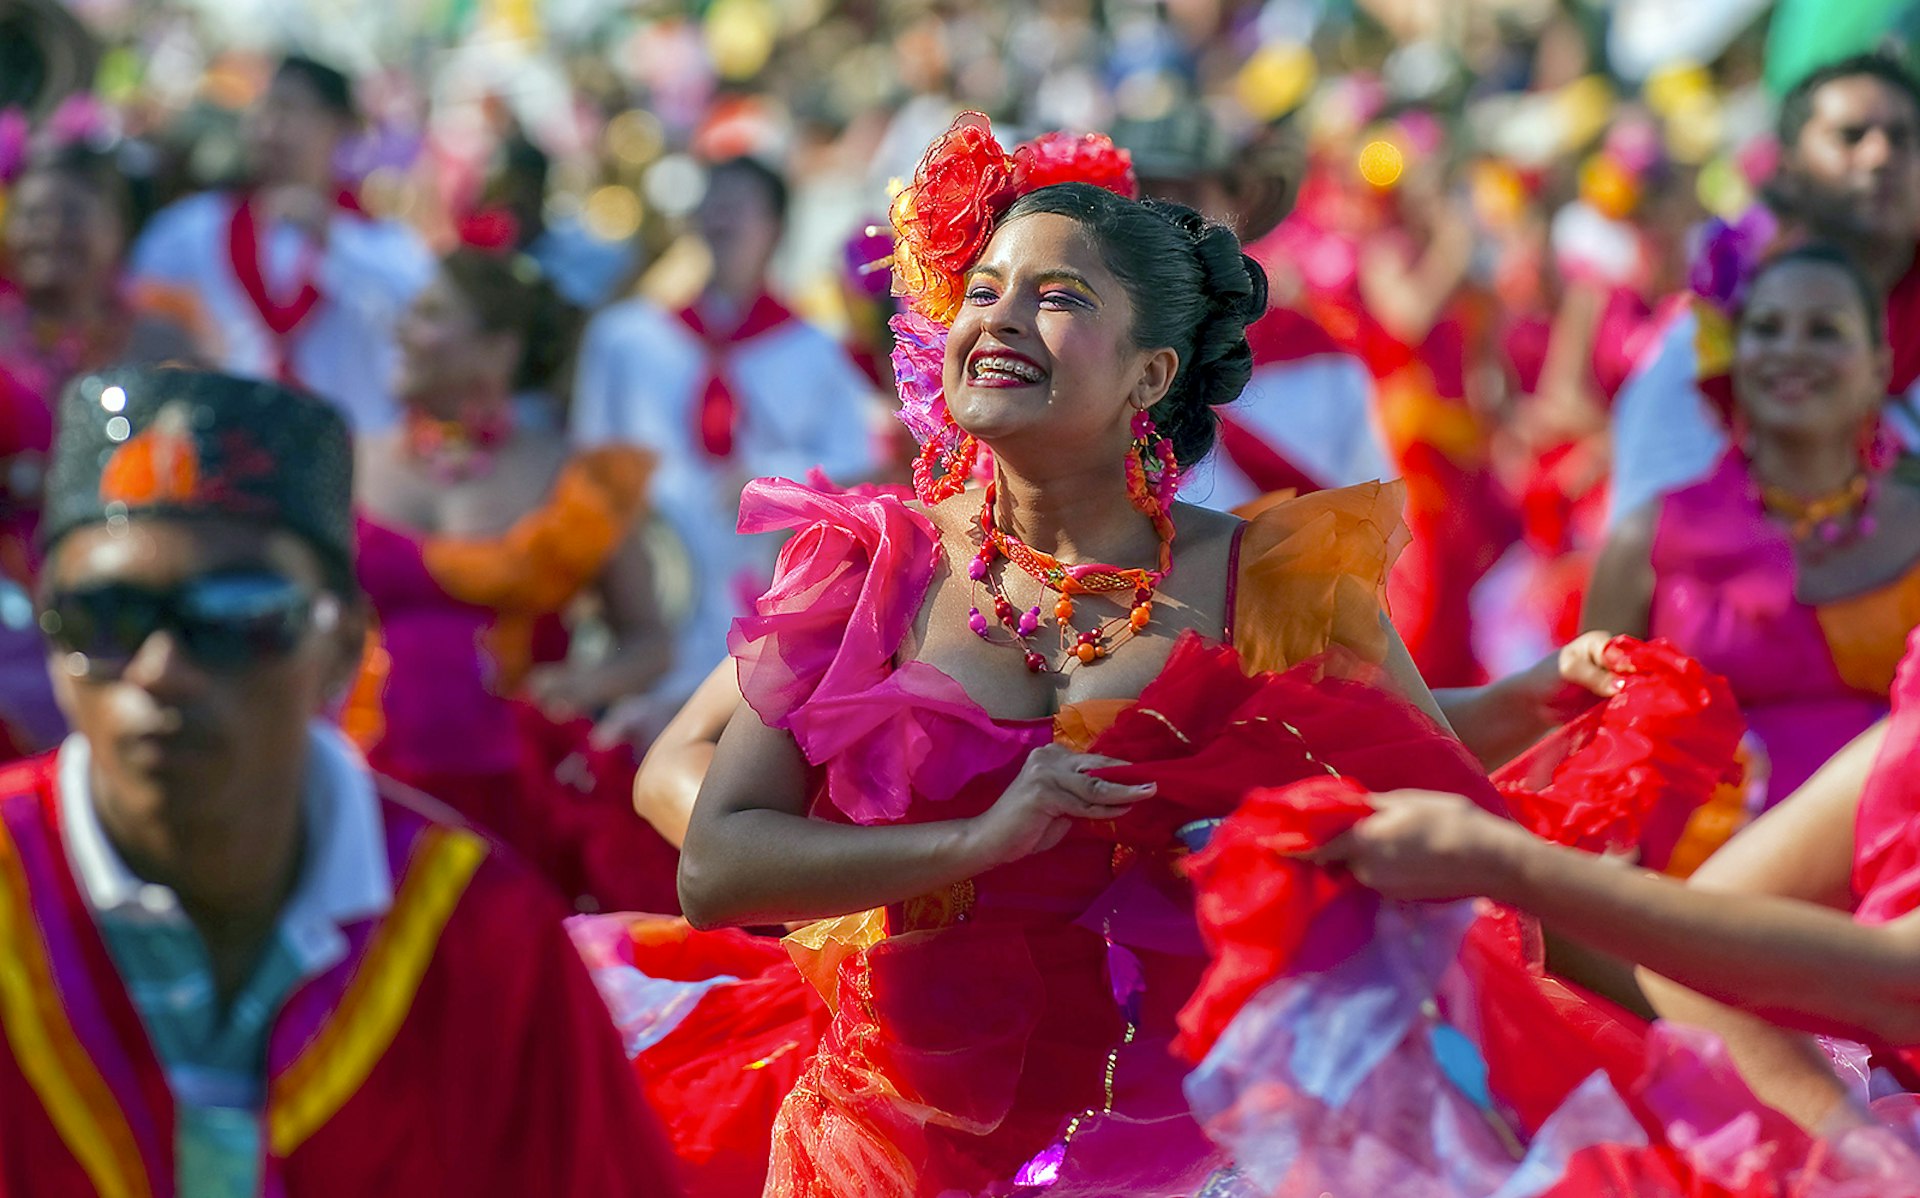 A woman wearing a frilly pink and orange dress smiles at the crowd while dancing